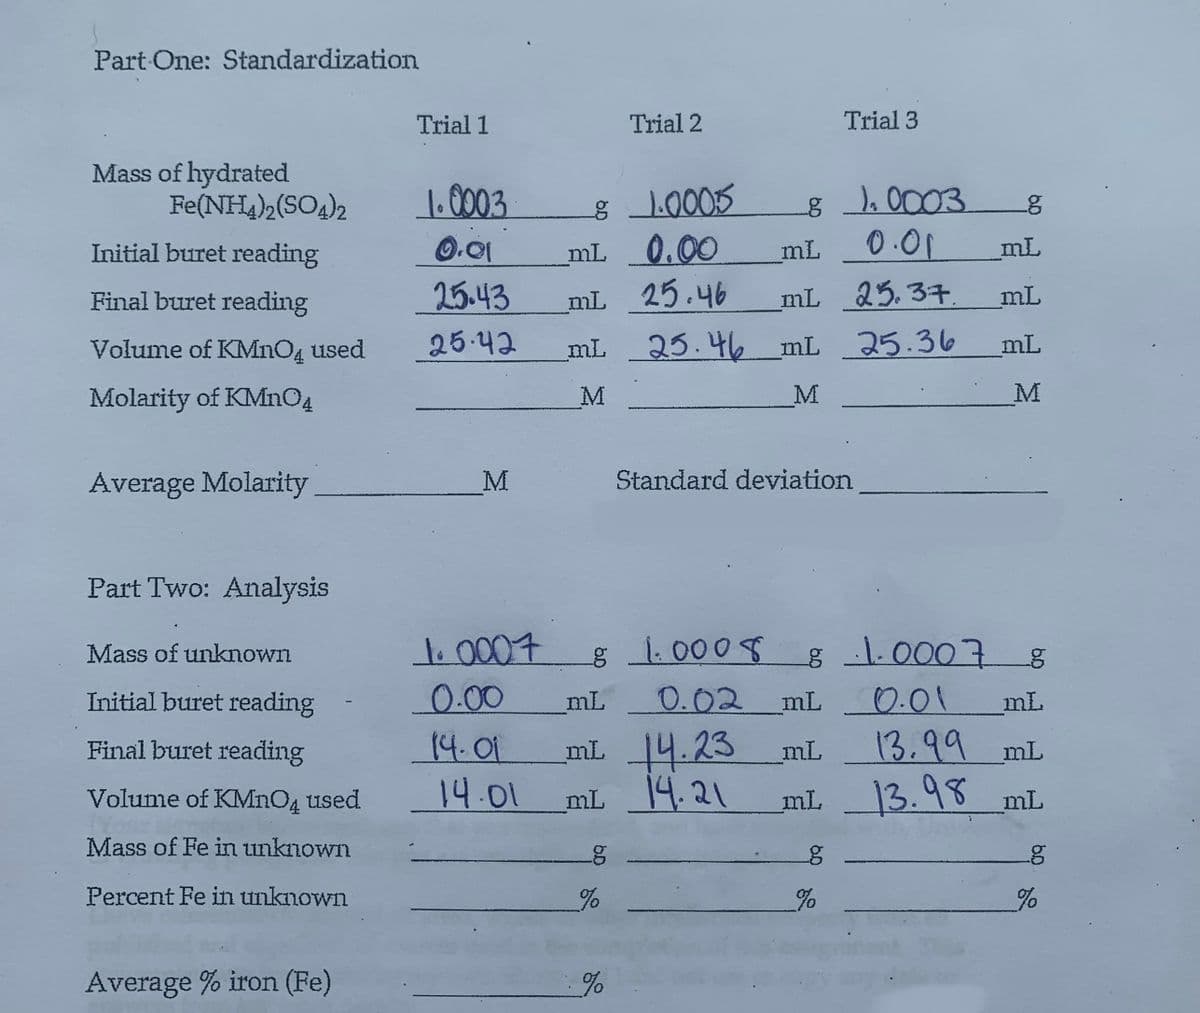 Part One: Standardization
Mass of hydrated
Fe(NH4)2(SO4)2
Initial buret reading
Final buret reading
Volume of KMnO4 used
Molarity of KMnO4
Average Molarity
Part Two: Analysis
Mass of unknown
Initial buret reading
Final buret reading
Volume of KMnO4 used
Mass of Fe in unknown
Percent Fe in unknown
Average % iron (Fe)
Trial 1
1.0003
0.01
25.43
25.42
M
1. 0007
0.00
14.01
14.01
8 1.0005
Trial 2
mL 0.00
mL
ML 25.46
mL
mL 25.46 mL 25.36
M
M
8 1.0008
g
%
%
8 1₁0003
0.01
25.37.
Standard deviation
mL
mL 14.23 mL
mL 14.21 _mL.
Trial 3
0.02 mL
g 1.0007 g
mL
13.99 mL
13.98 mL
mL 0.01
g
__%
8
mL
mL
mL
M
%